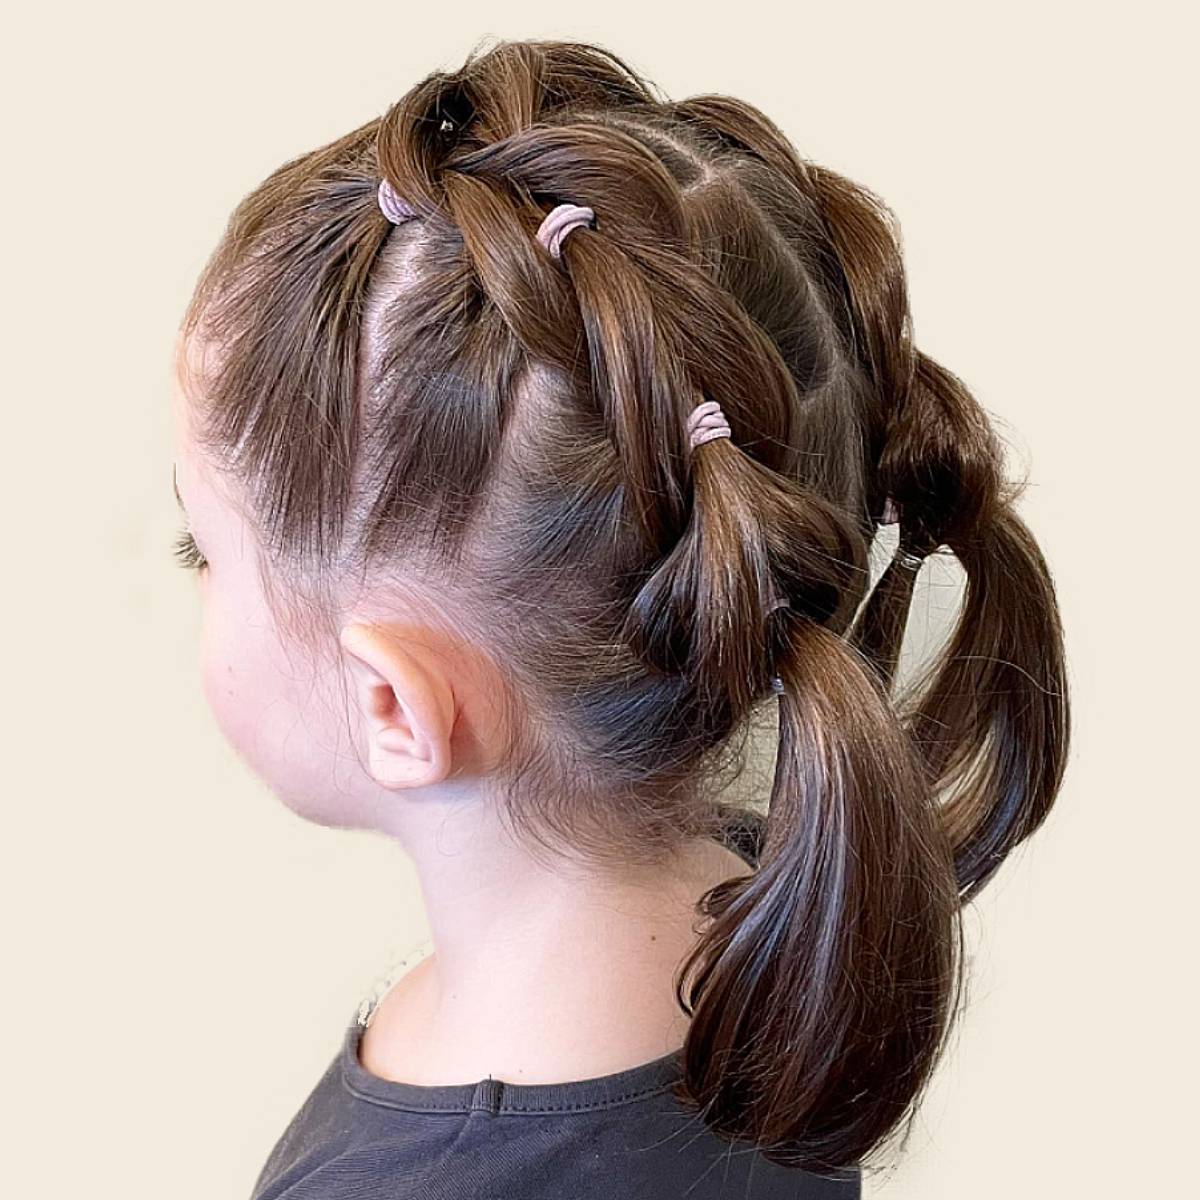 22 Easy Kids Hairstyles  Best Hairstyles for Girls